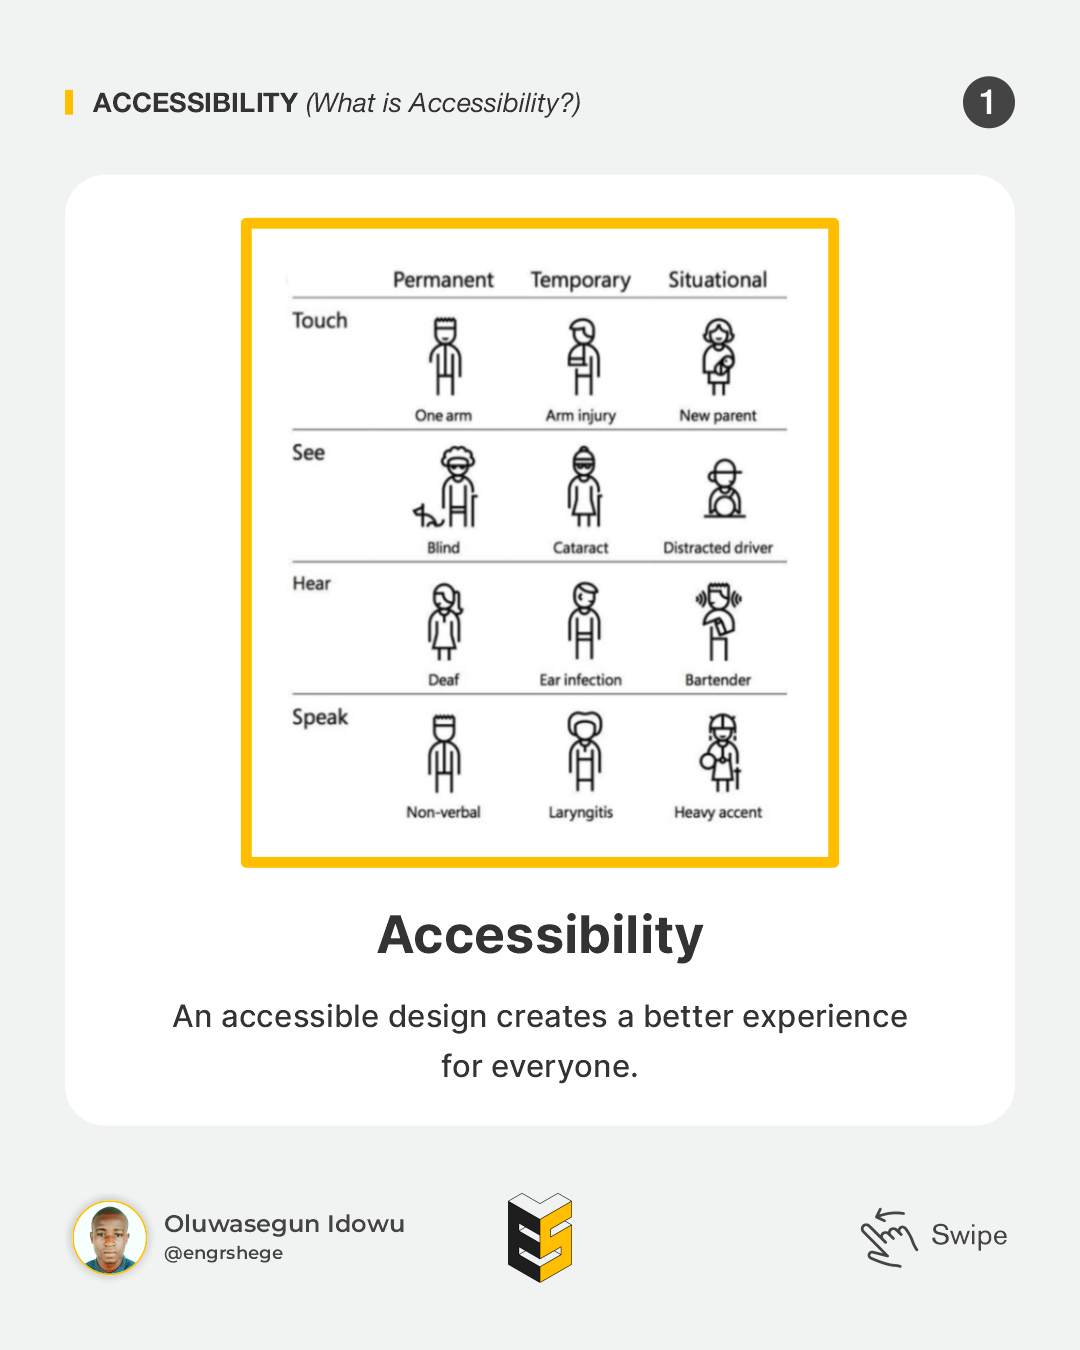 1. What is Accessibility?